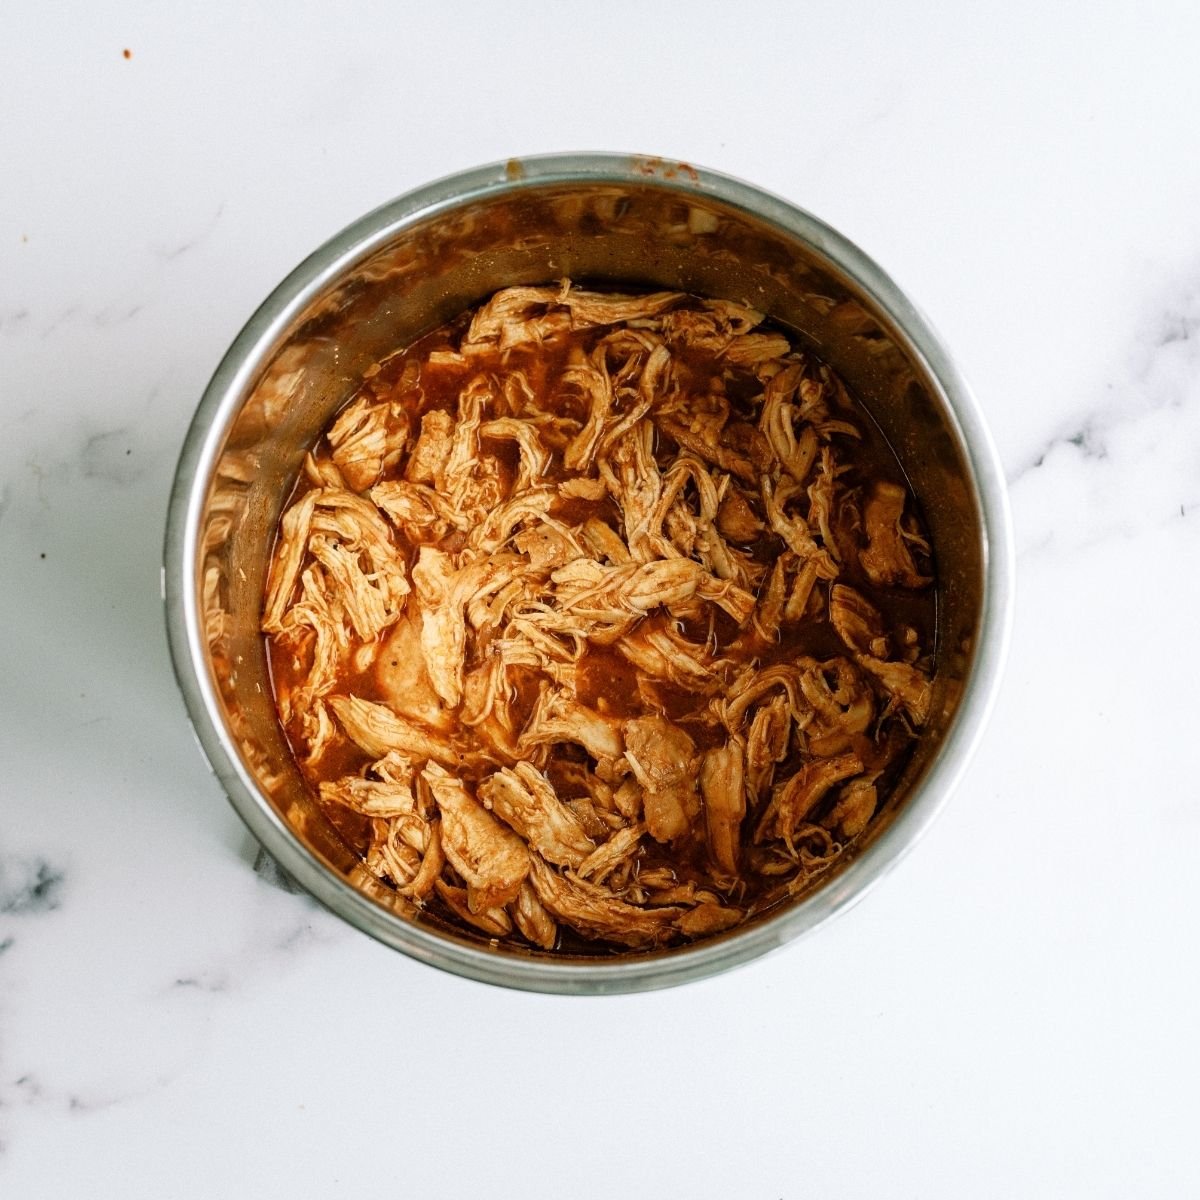 Shredded BBQ Chicken mixed with juices in Instant Pot